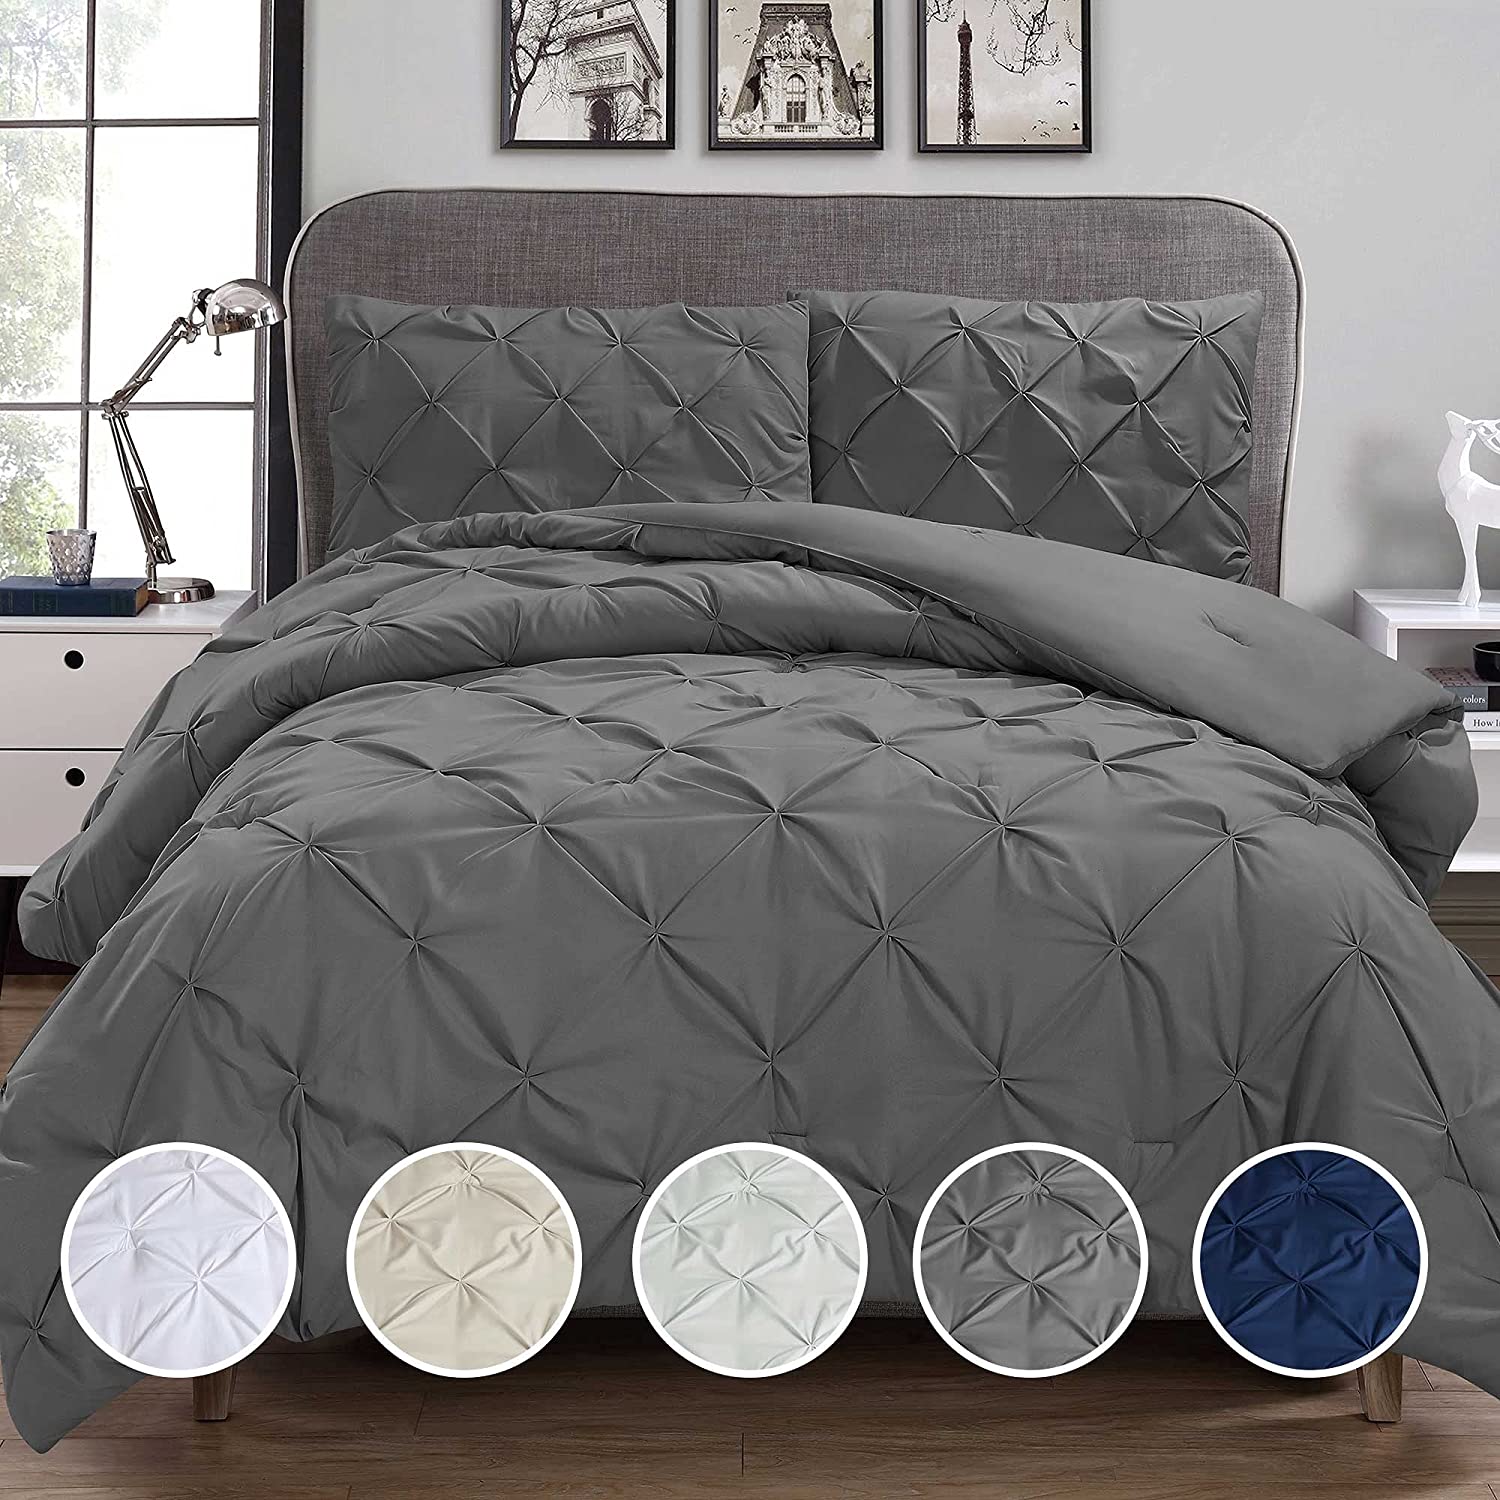 Price:$31.49  HOME Pinch Pleat Duvet Covers King Size with Pillow Sham, Dark Grey : Home & Kitchen